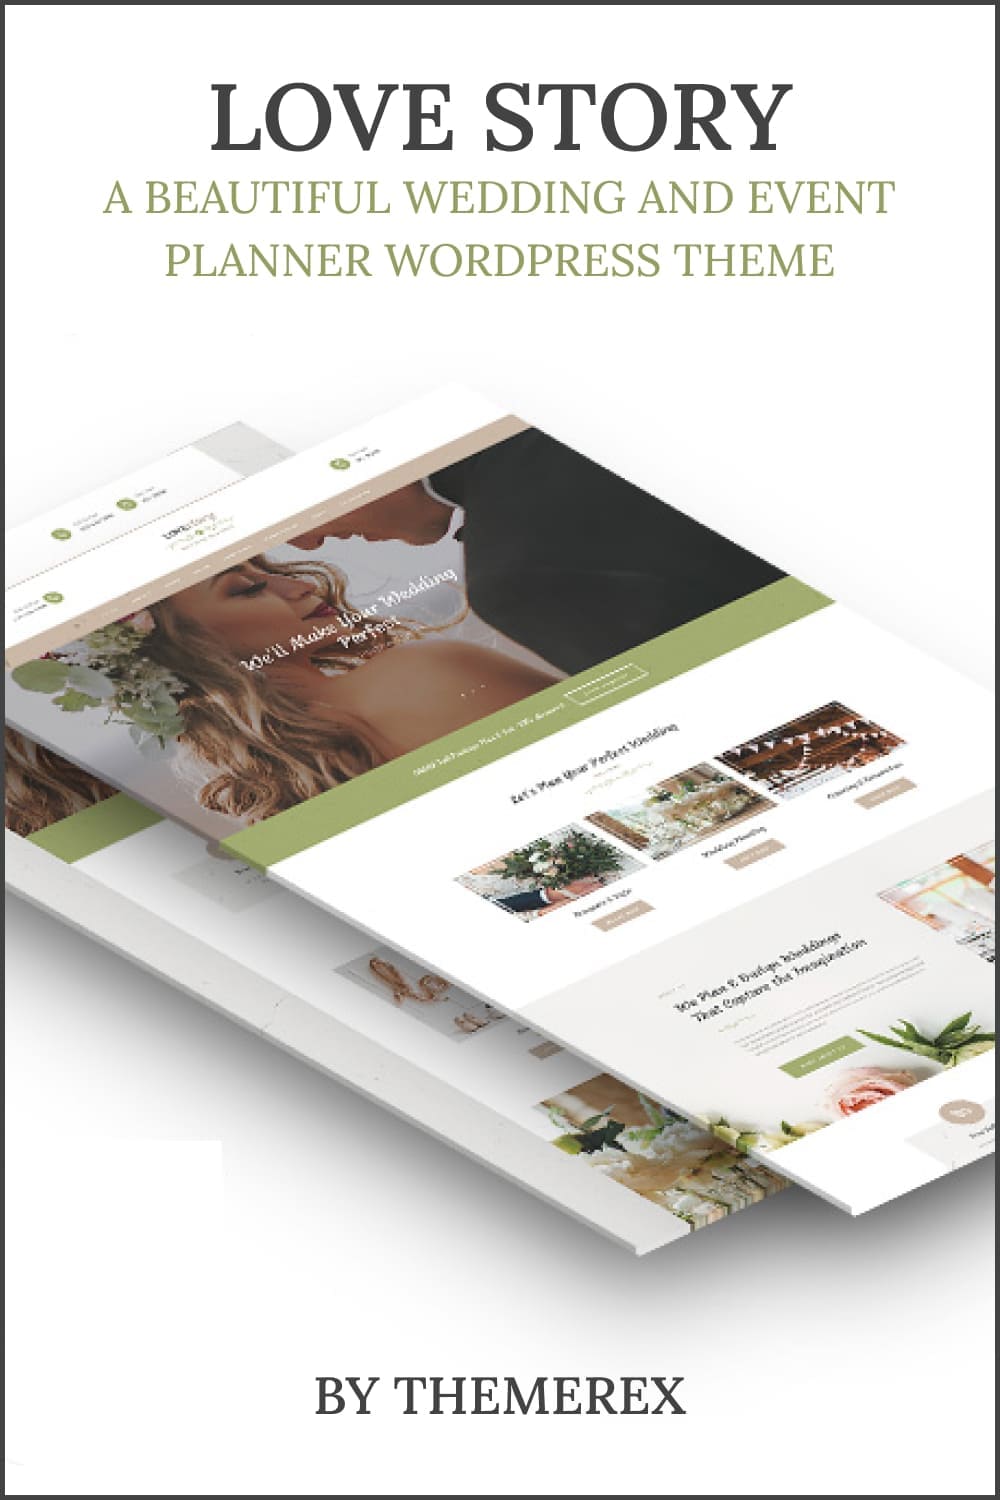 Love story a beautiful wedding and event planner wordpress theme, picture for pinterest 1000x1500.